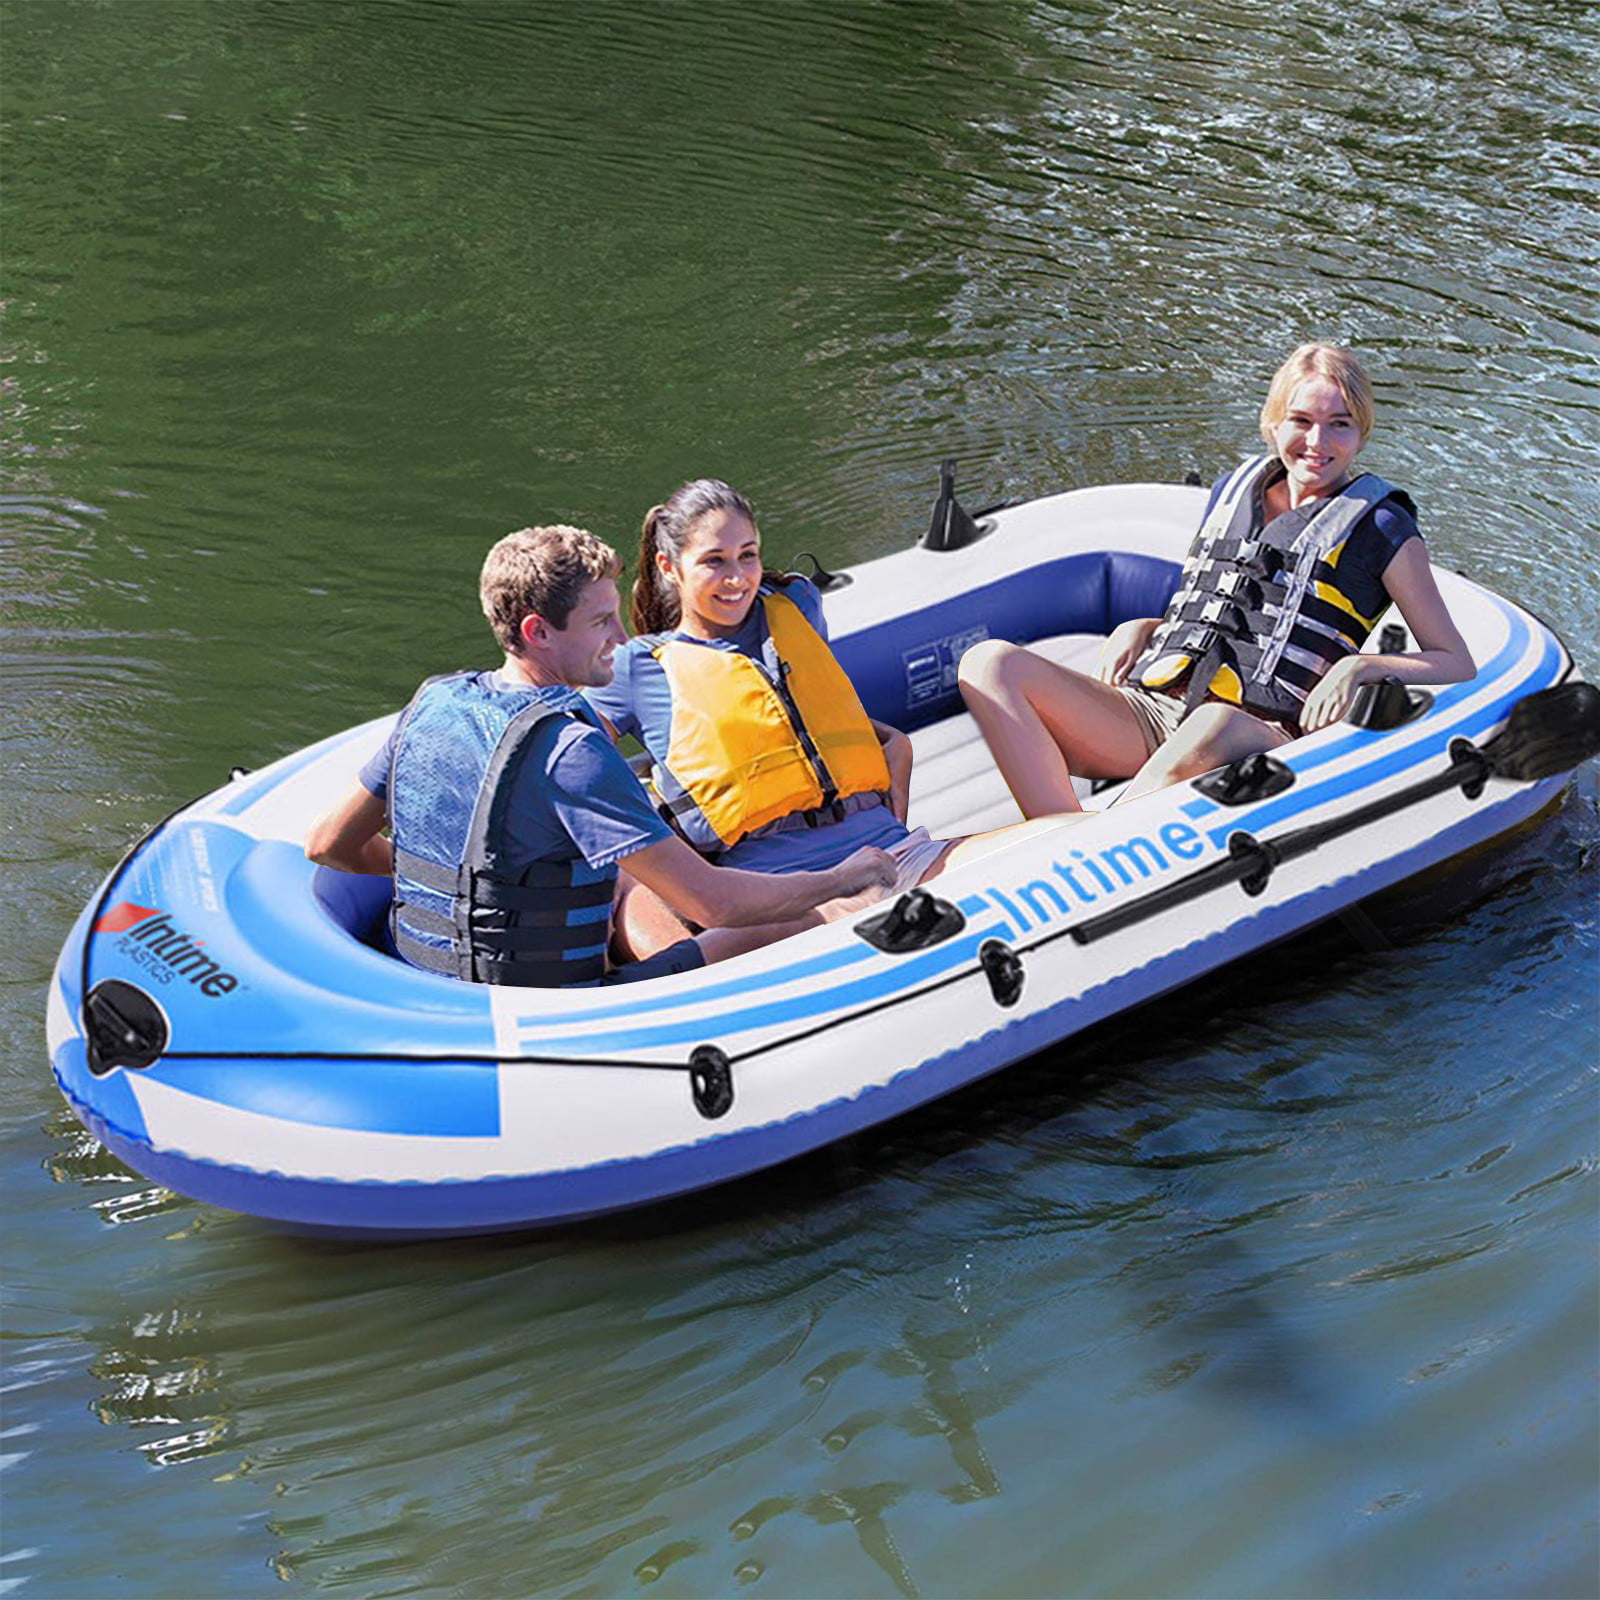 3/4Person 8 FT Inflatable Dinghy Boat Fishing Tender Rafting Water Sports W/Pump 